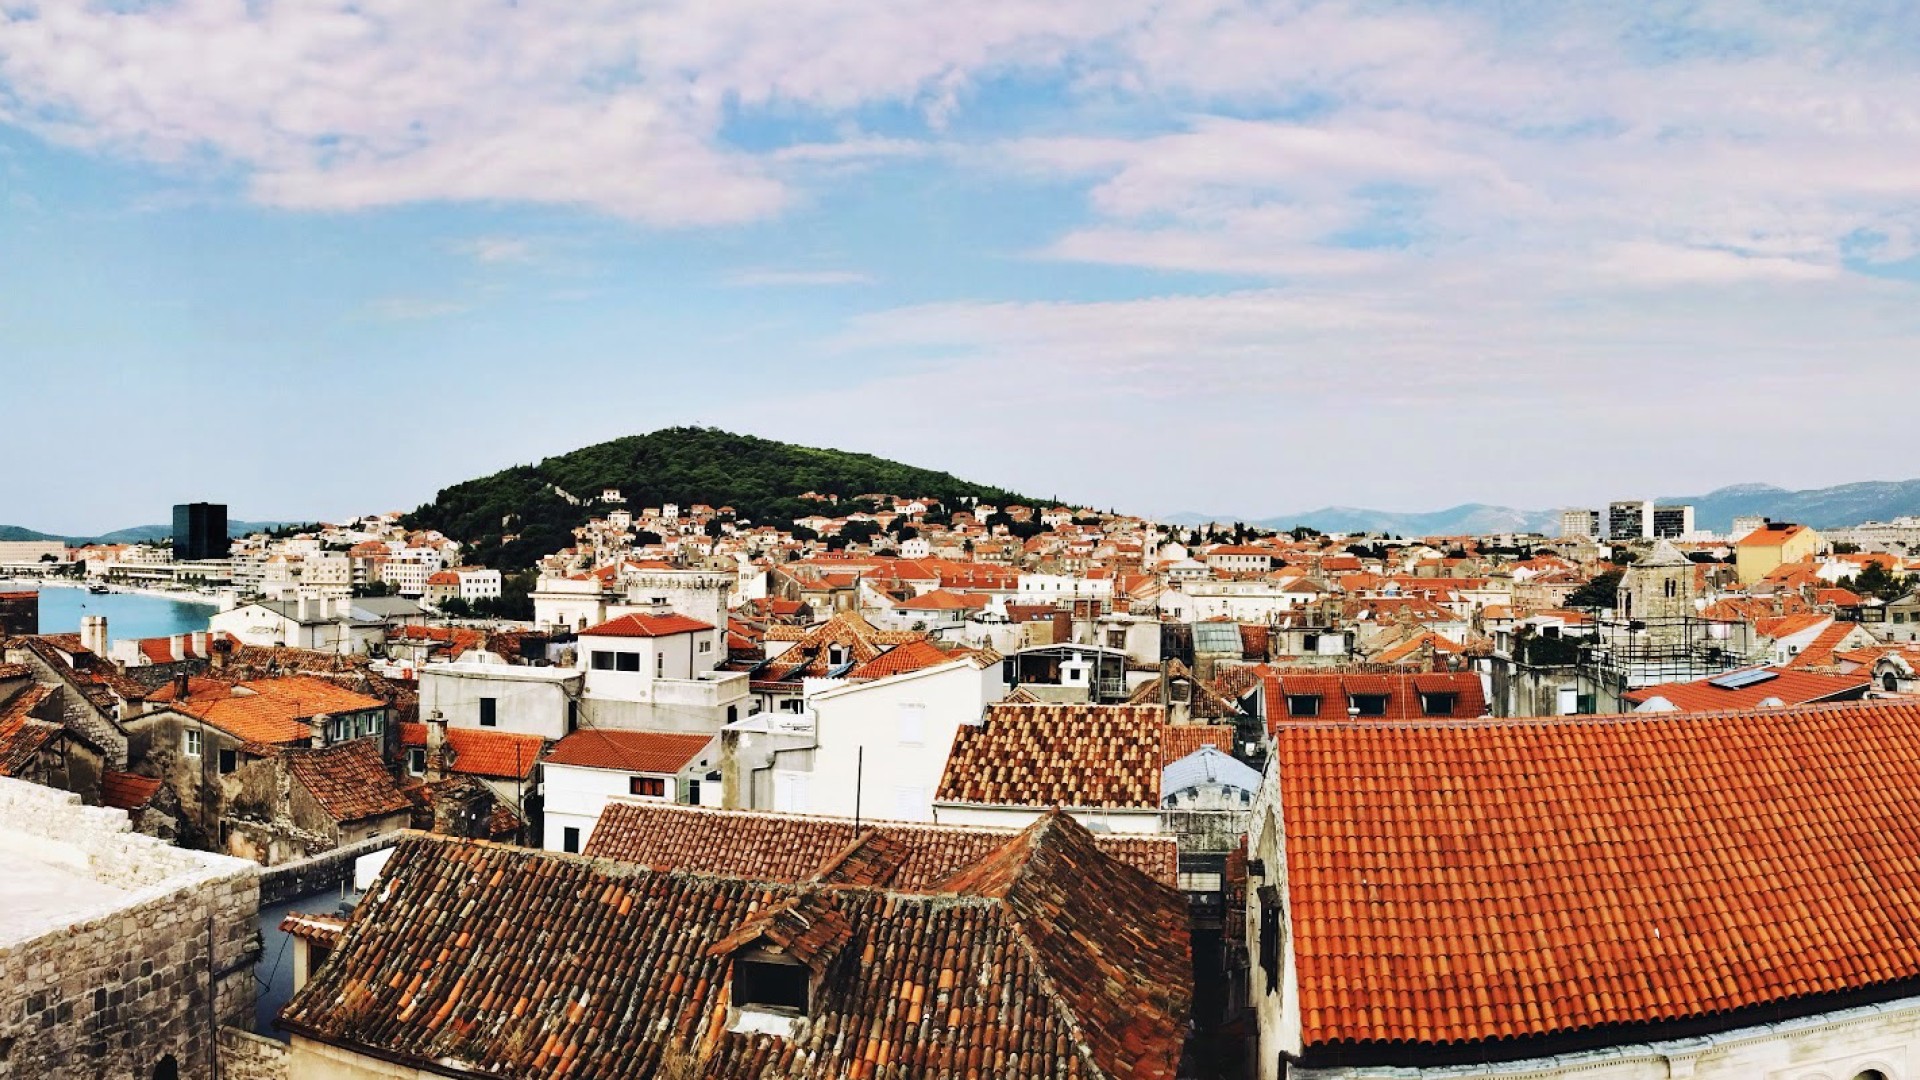 Panoramic view of a traditional Croatian town with white homes with terracotta rooftops 